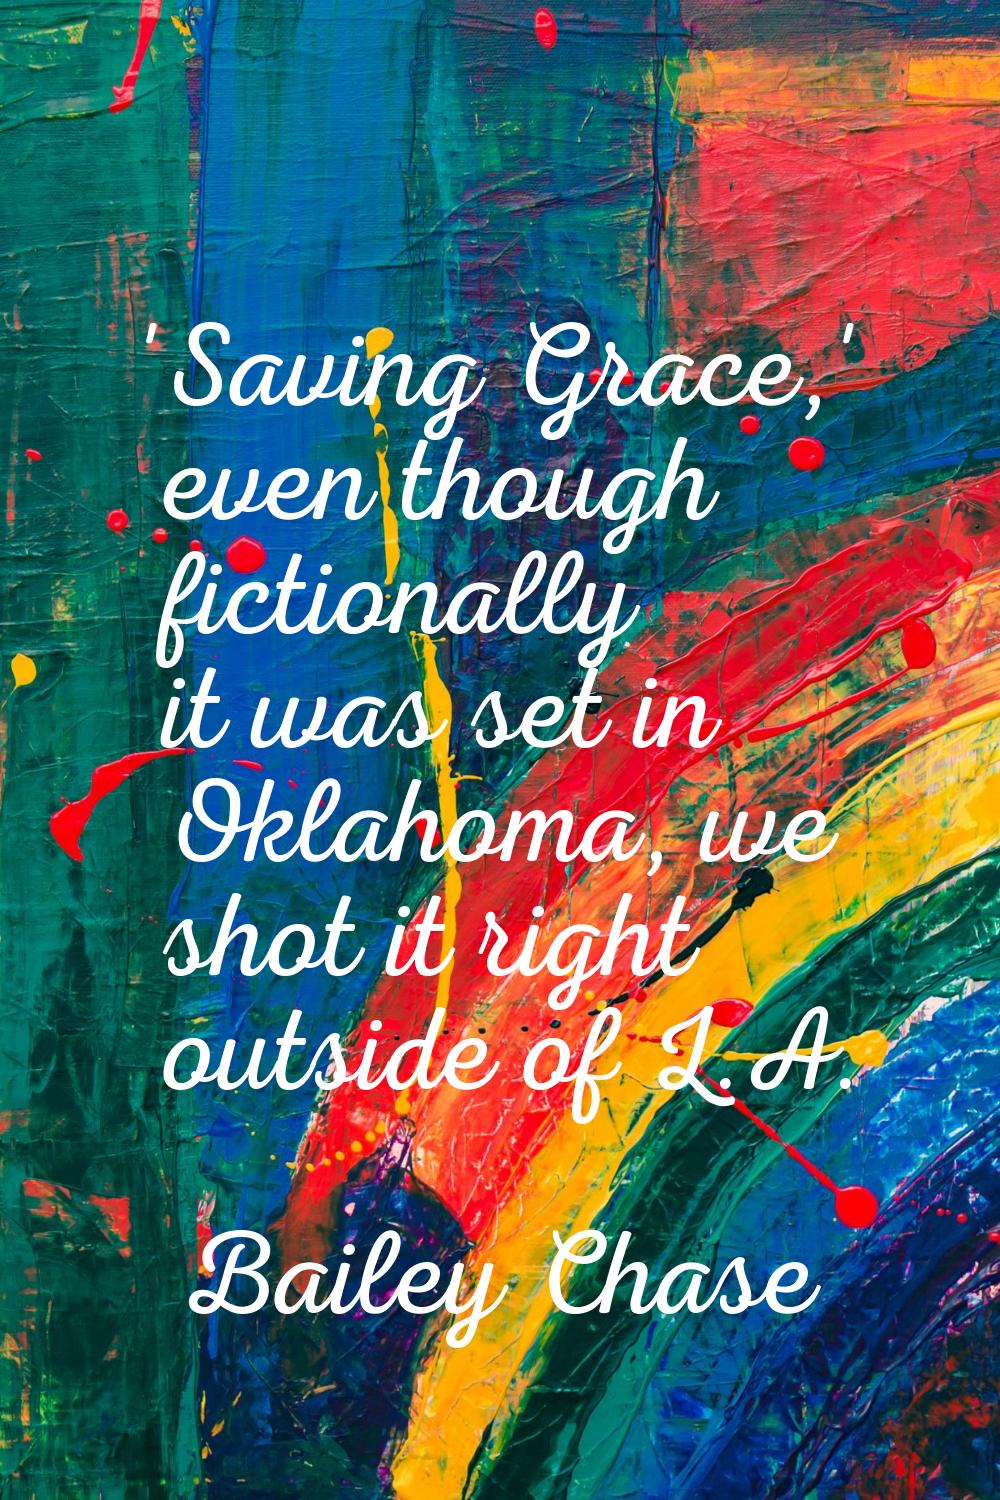 'Saving Grace,' even though fictionally it was set in Oklahoma, we shot it right outside of L.A.